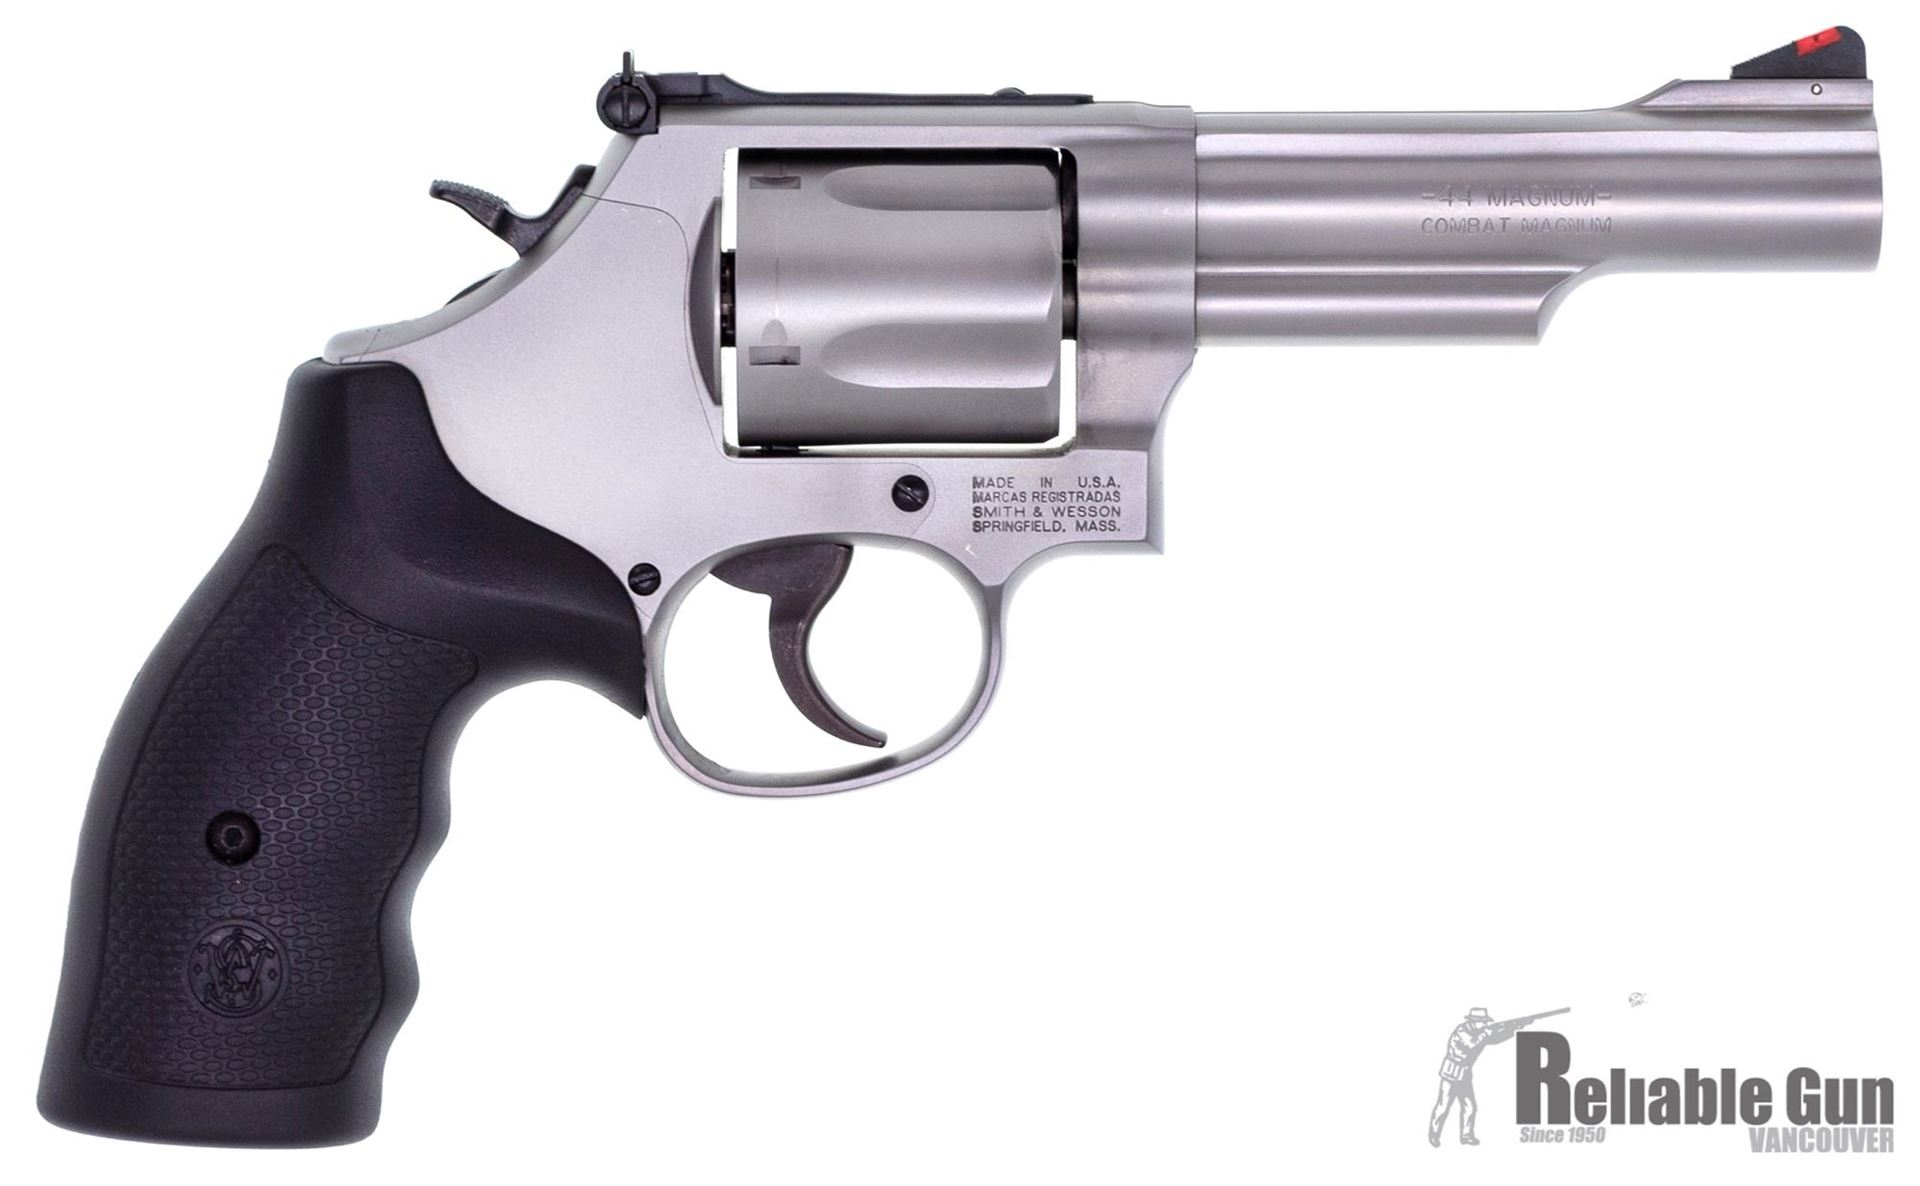 Reliable Gun Vancouver 3227 Fraser Street Vancouver Bc Canada Used Smith And Wesson Model 69